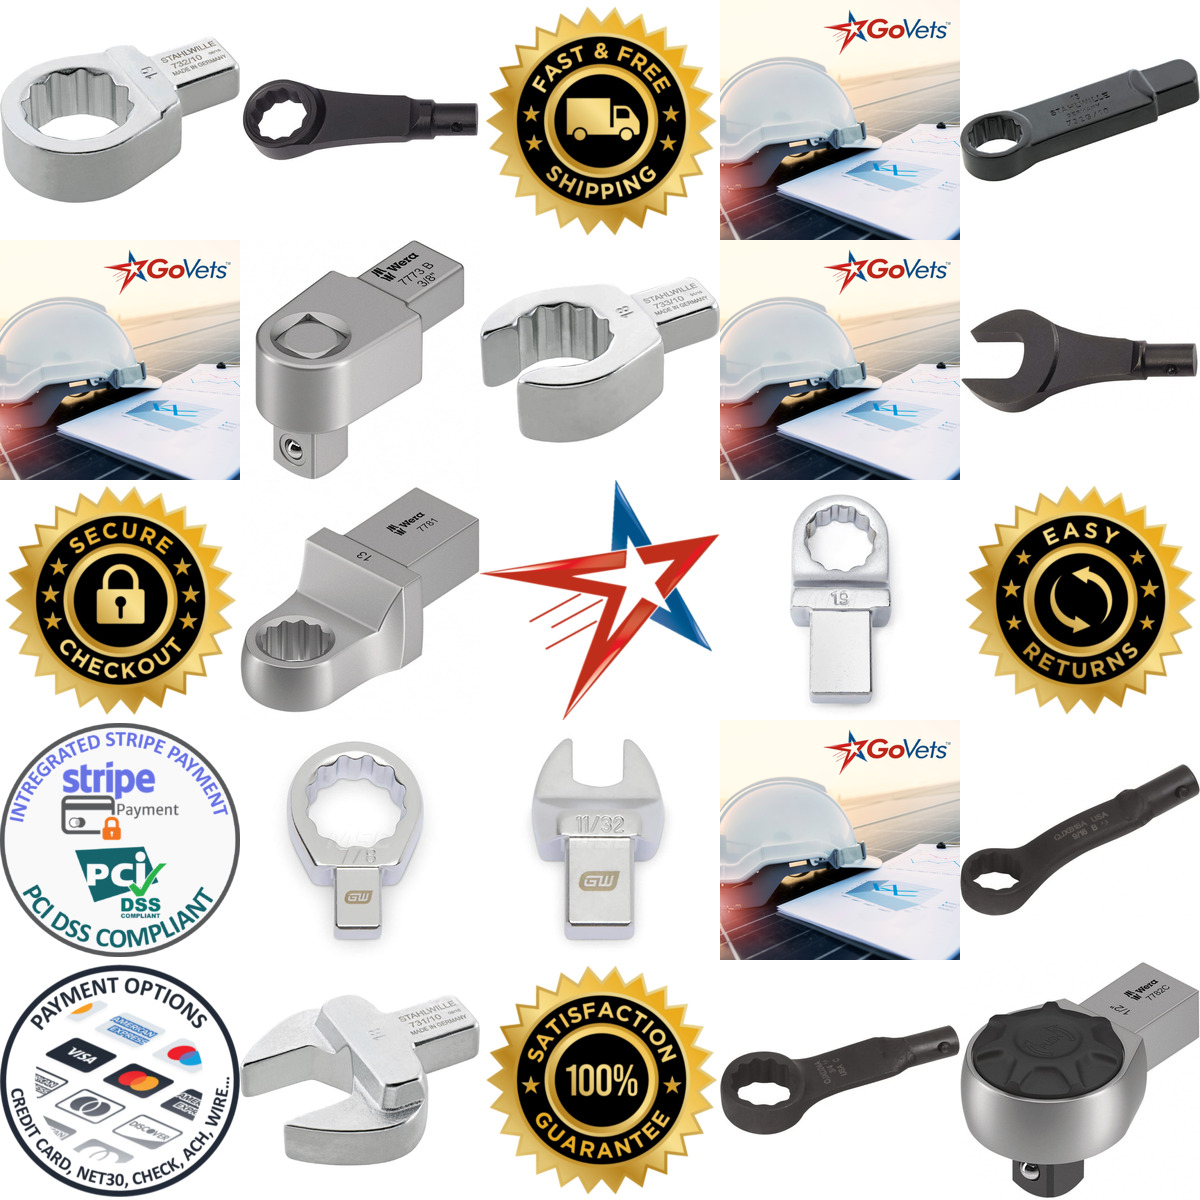 A selection of Torque Wrench Interchangeable Heads products on GoVets